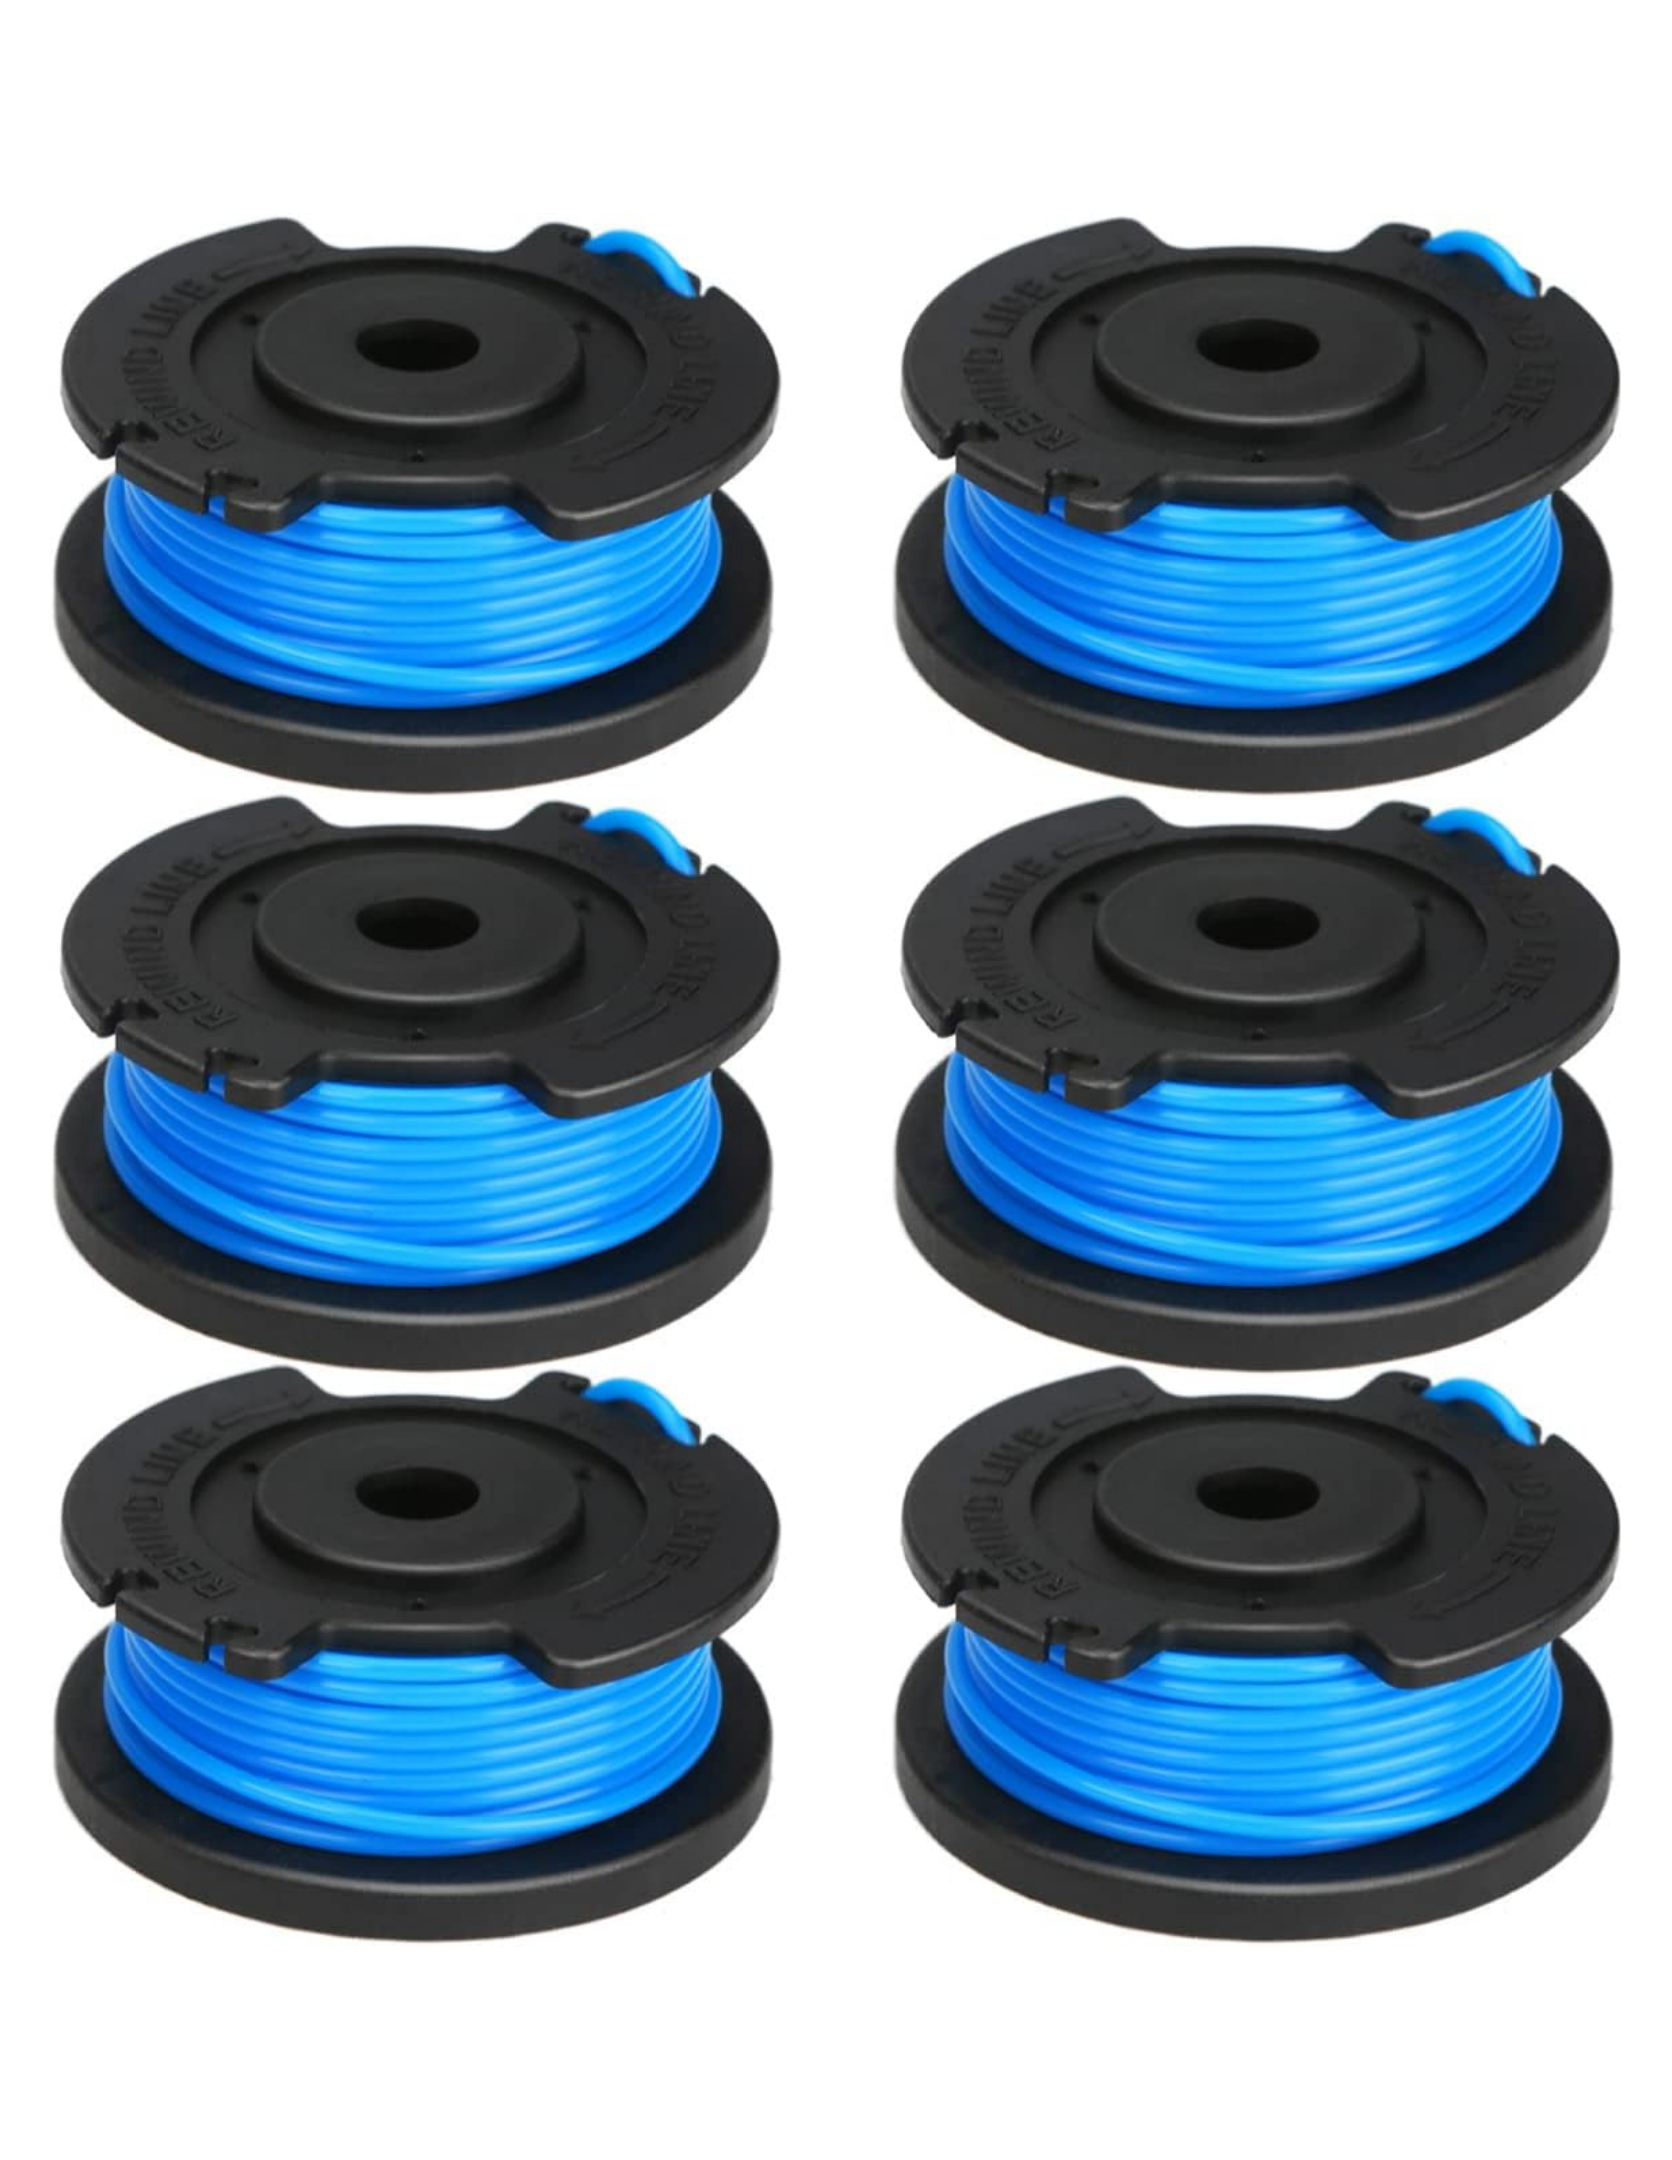 THTEN 88524 Trimmer Spool Line Compatible with 0.065" Toro 51484 51486 51487 88506 16ft Single Line String Trimmer Spool 6 Pack